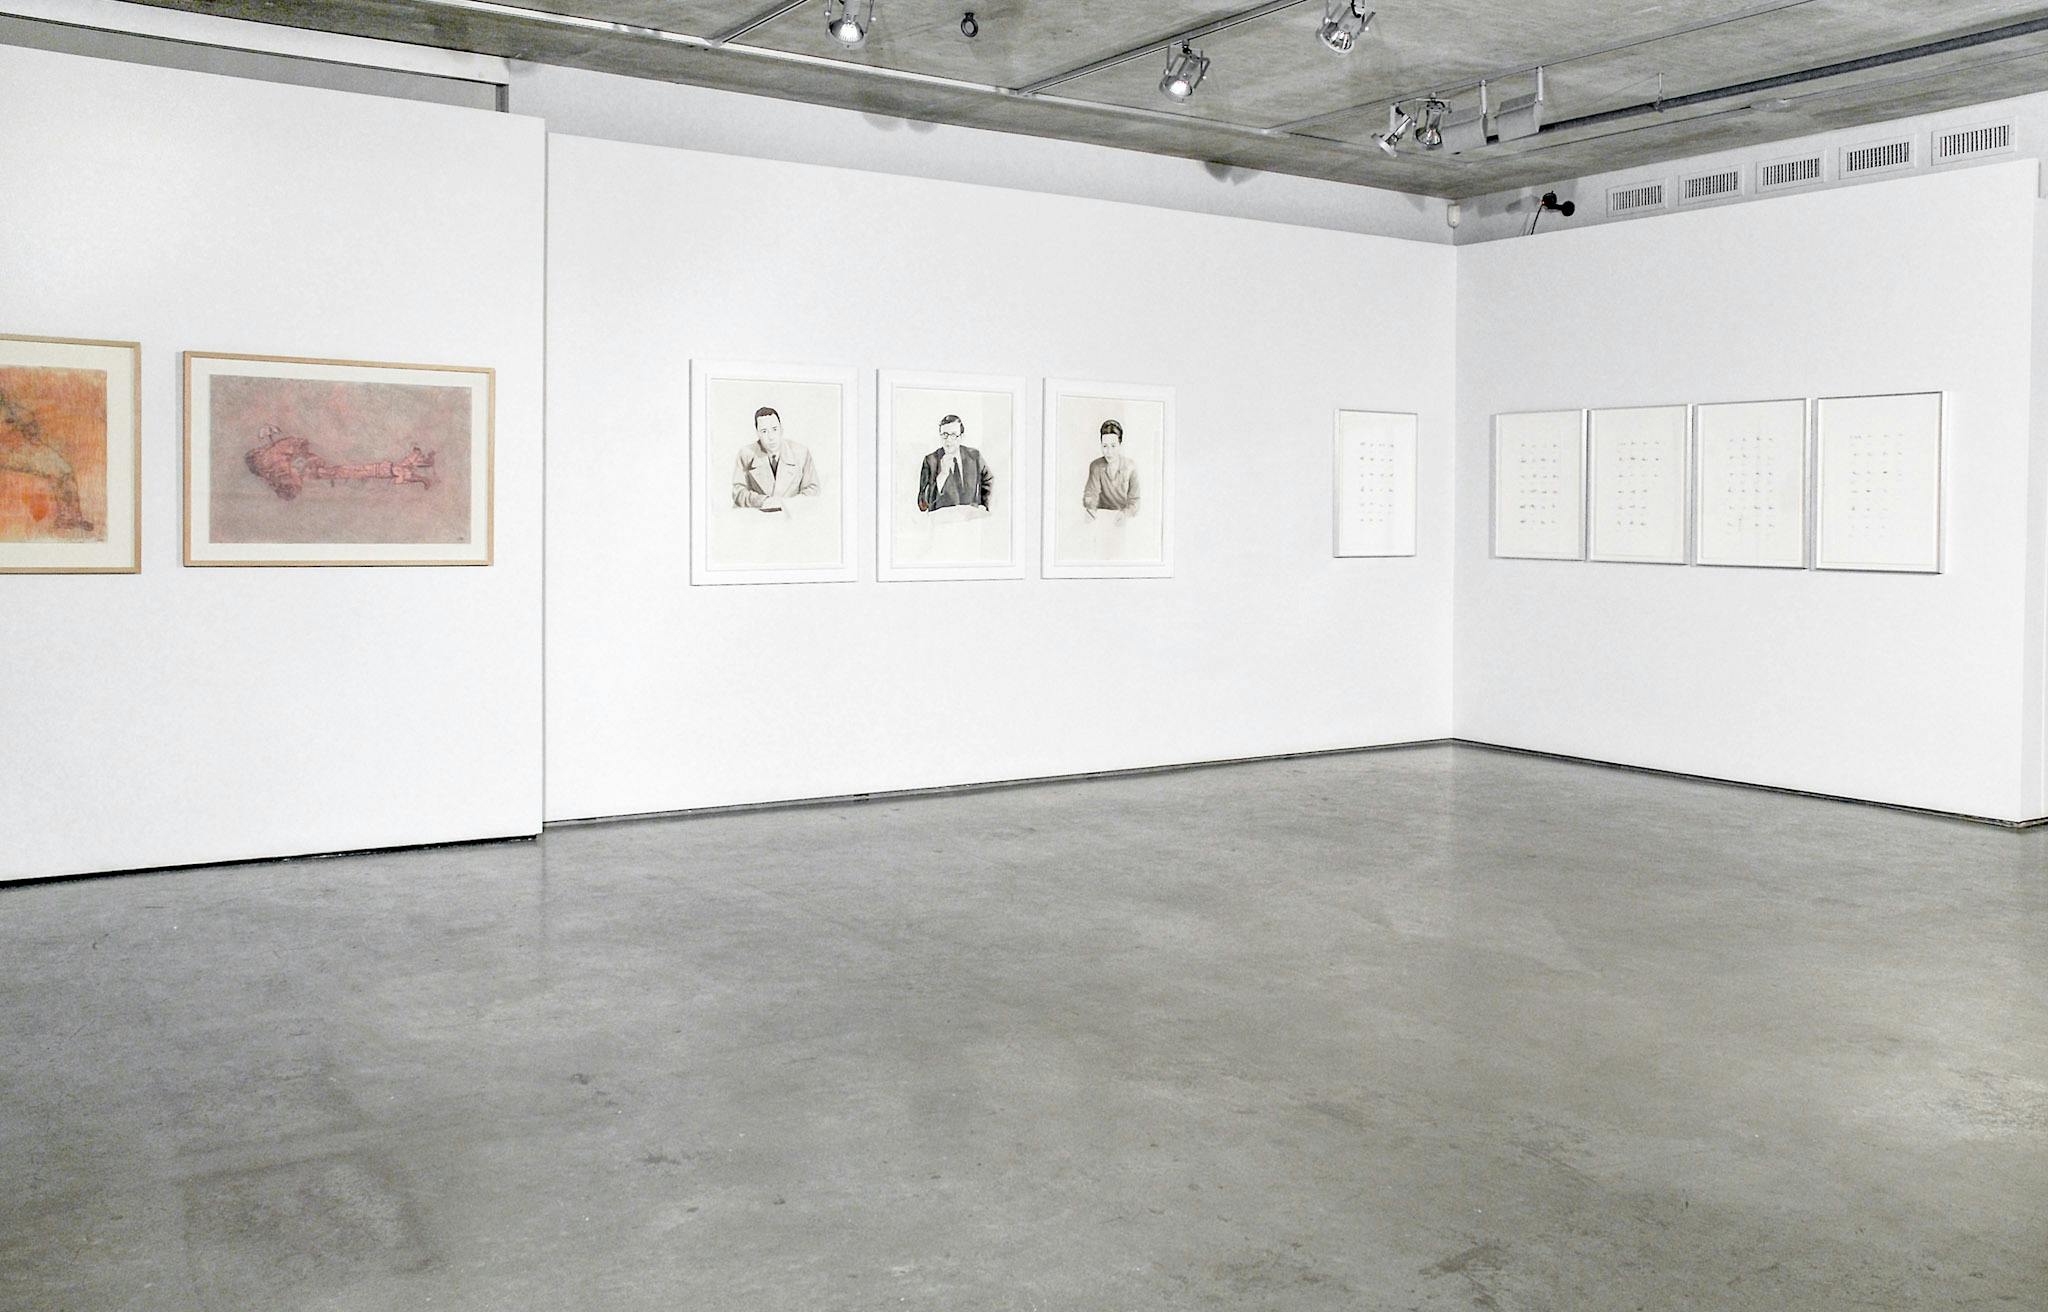 Ten drawings are mounted on the gallery walls. There is a set of three black and white portraits of people wearing suits. A set of five drawings show dots drawn on white sheets of paper. 